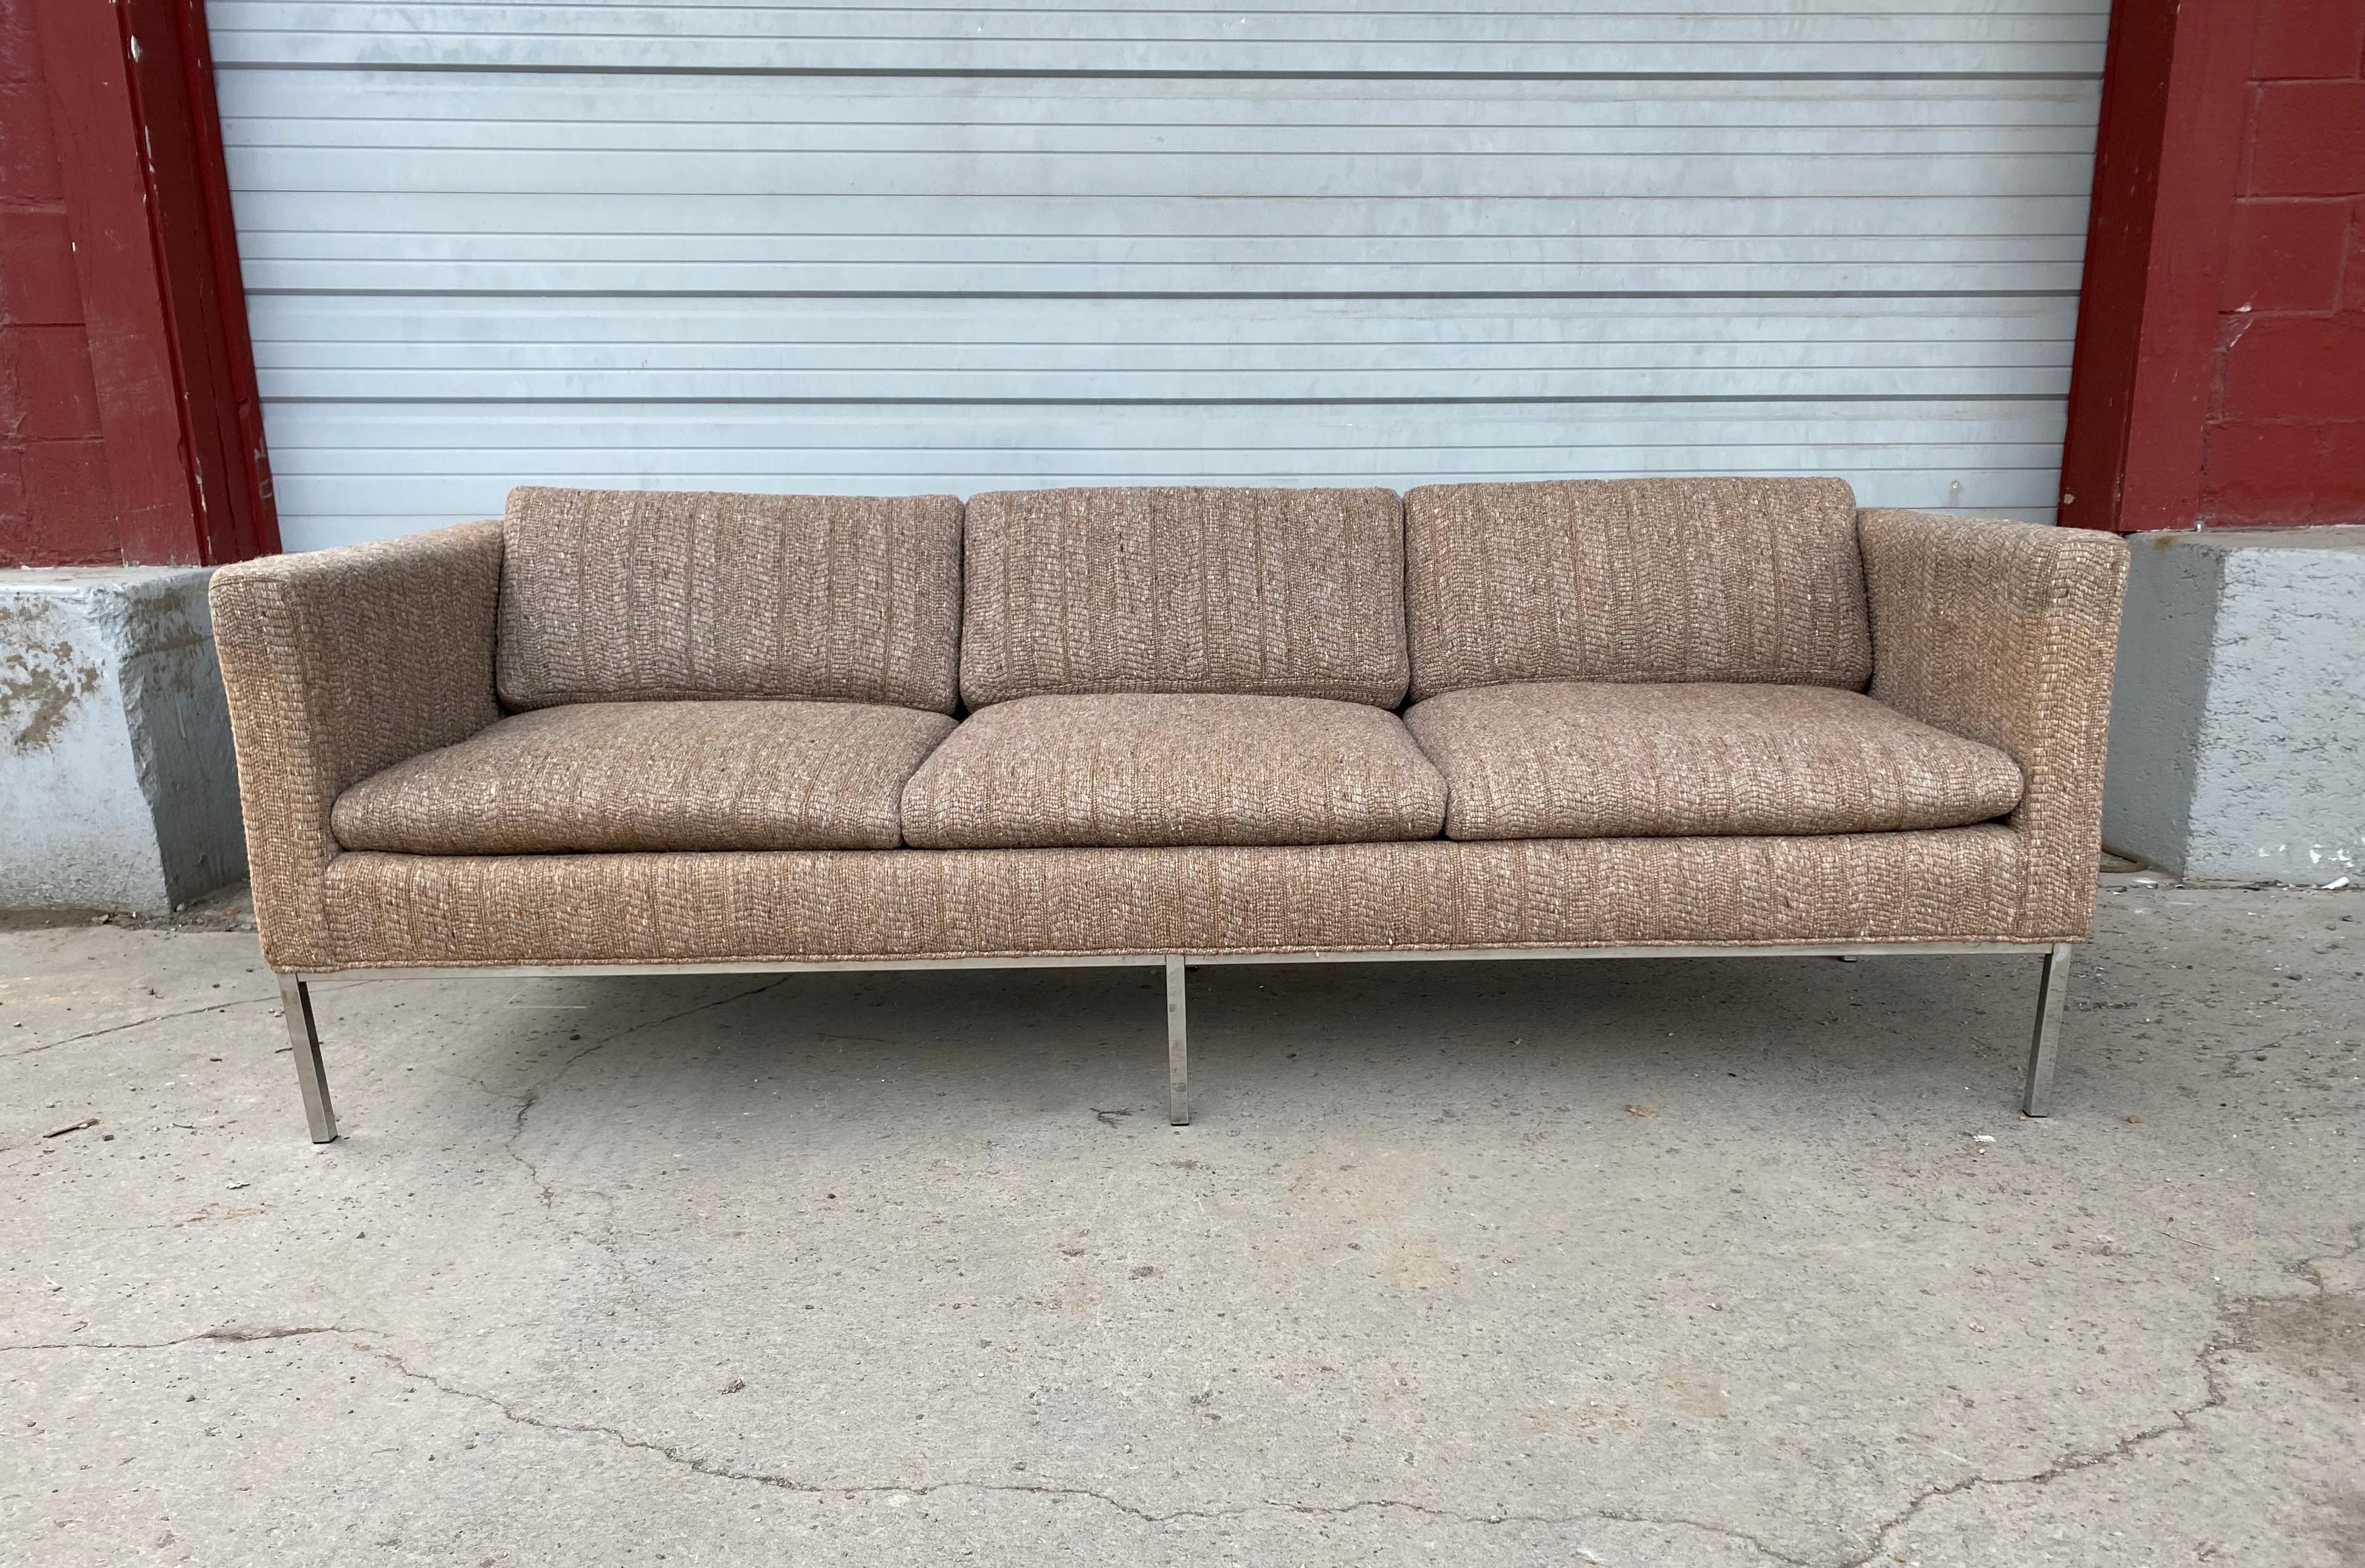 Classic modernist fabric and chrome three-seat sofa attributed to Milo Baughman, retains original wool upholstery, in nice usable condition, soft and extremely comfortable, slight fading, free of rips tears, stains, odors etc, hand delivery avail to